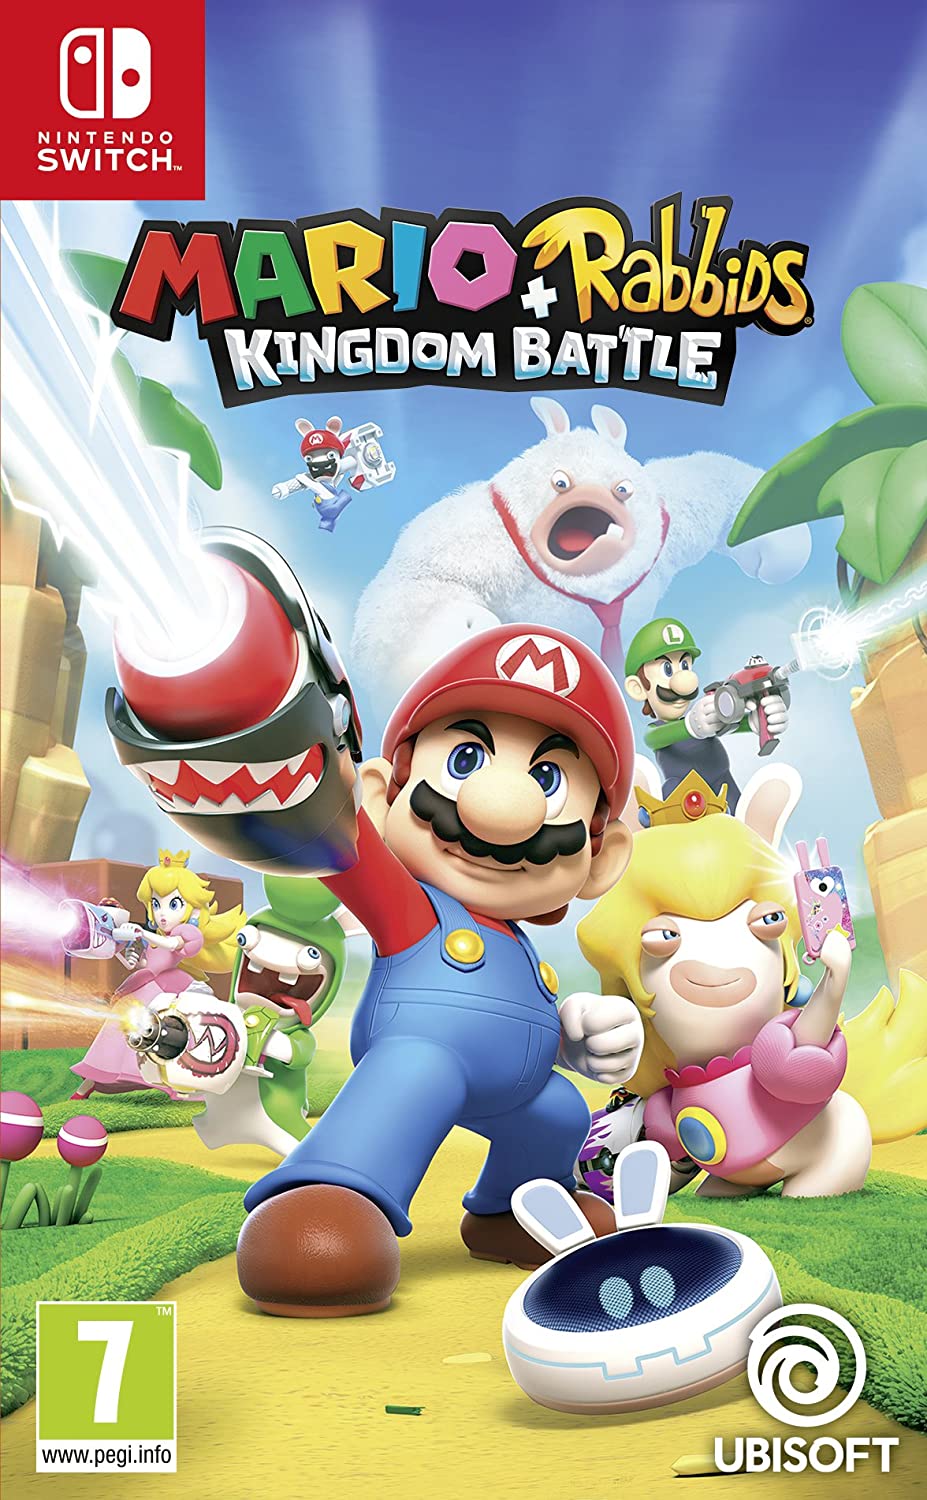 [Switch Save Progression] - Mario + Rabbids Kingdom Battle - Complete Save Progression Akirac Other Mods Seasonal and Non Seasonal Save Mod - Modded Items and Gear - Hacks - Cheats - Trainers for Playstation 4 - Playstation 5 - Nintendo Switch - Xbox One